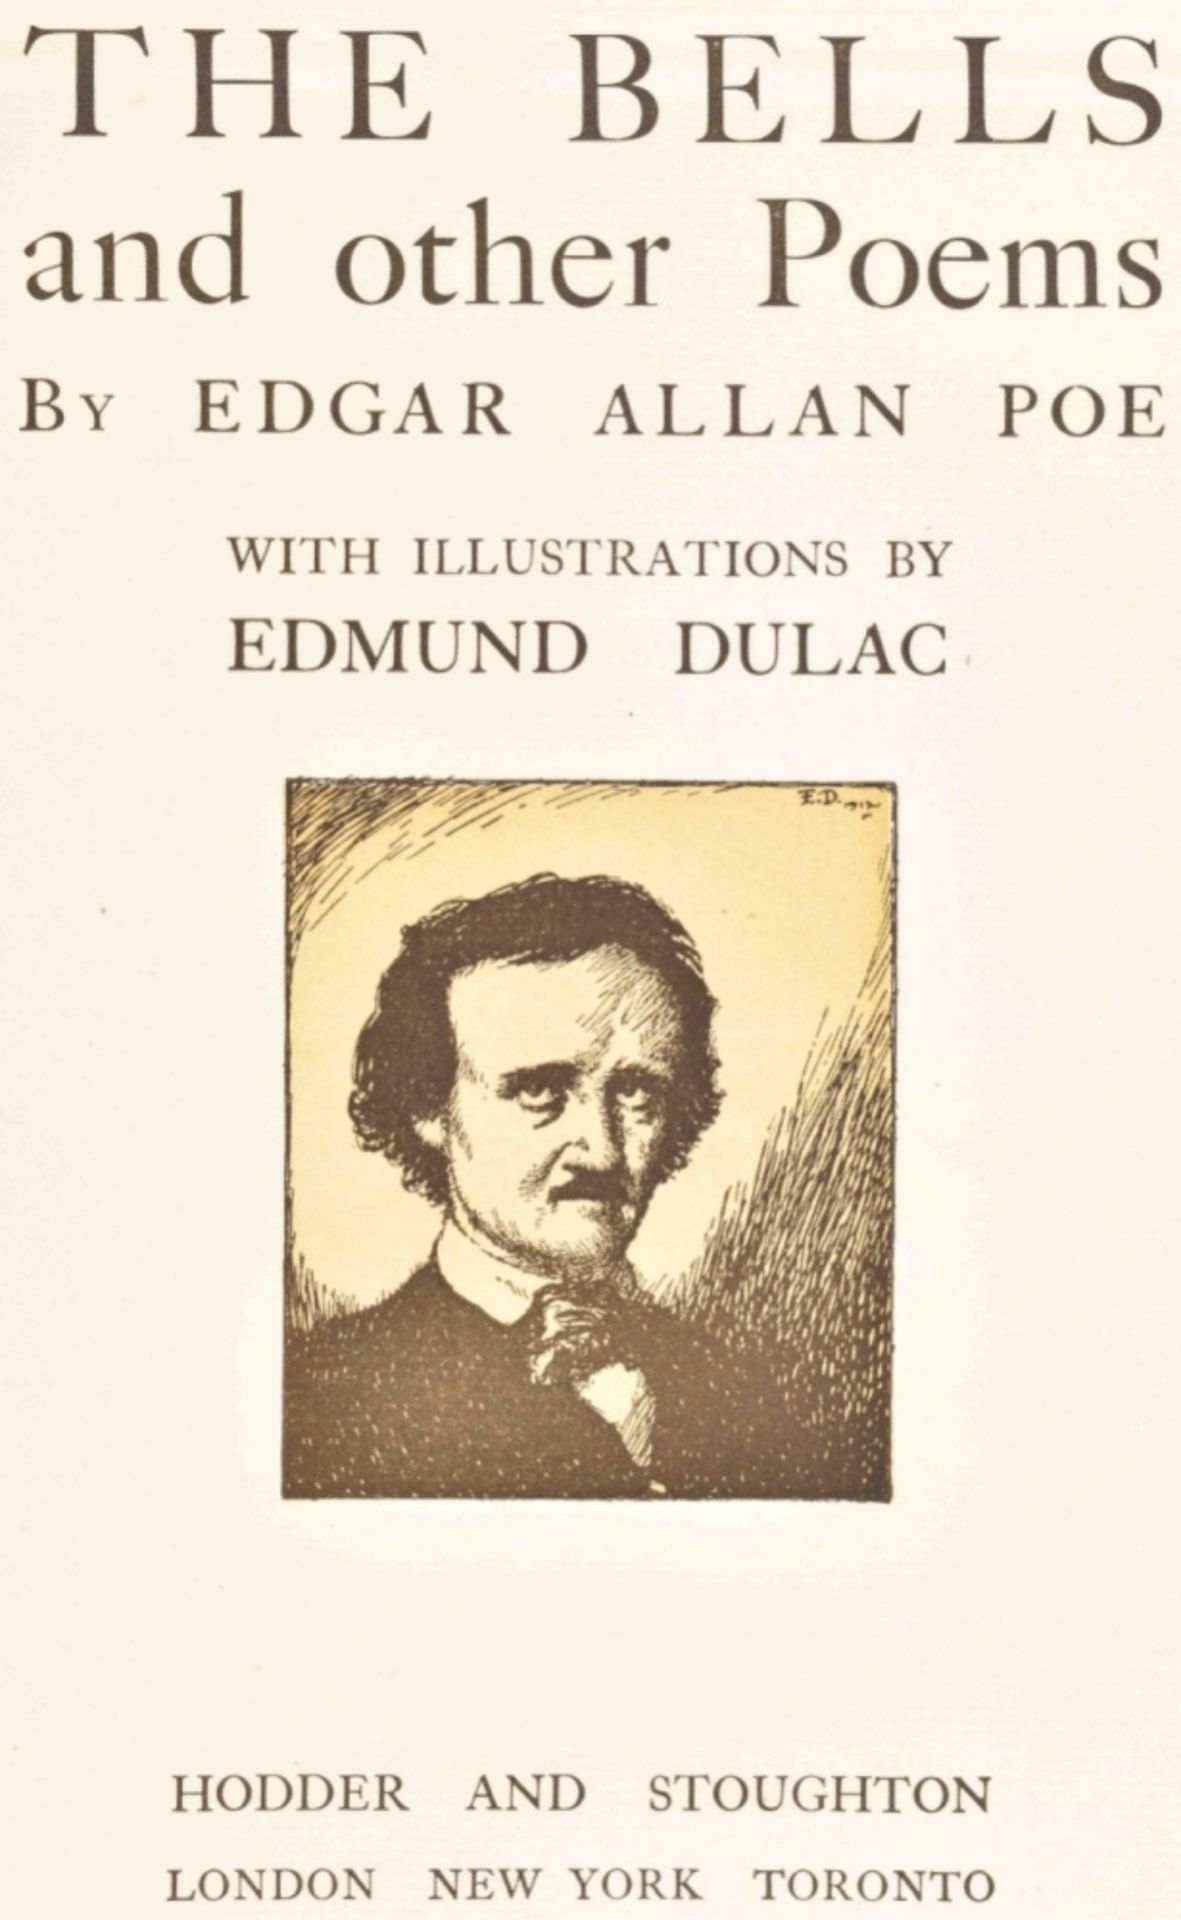 Edgar Allen Poe. The Bells and other Poems - Image 3 of 5